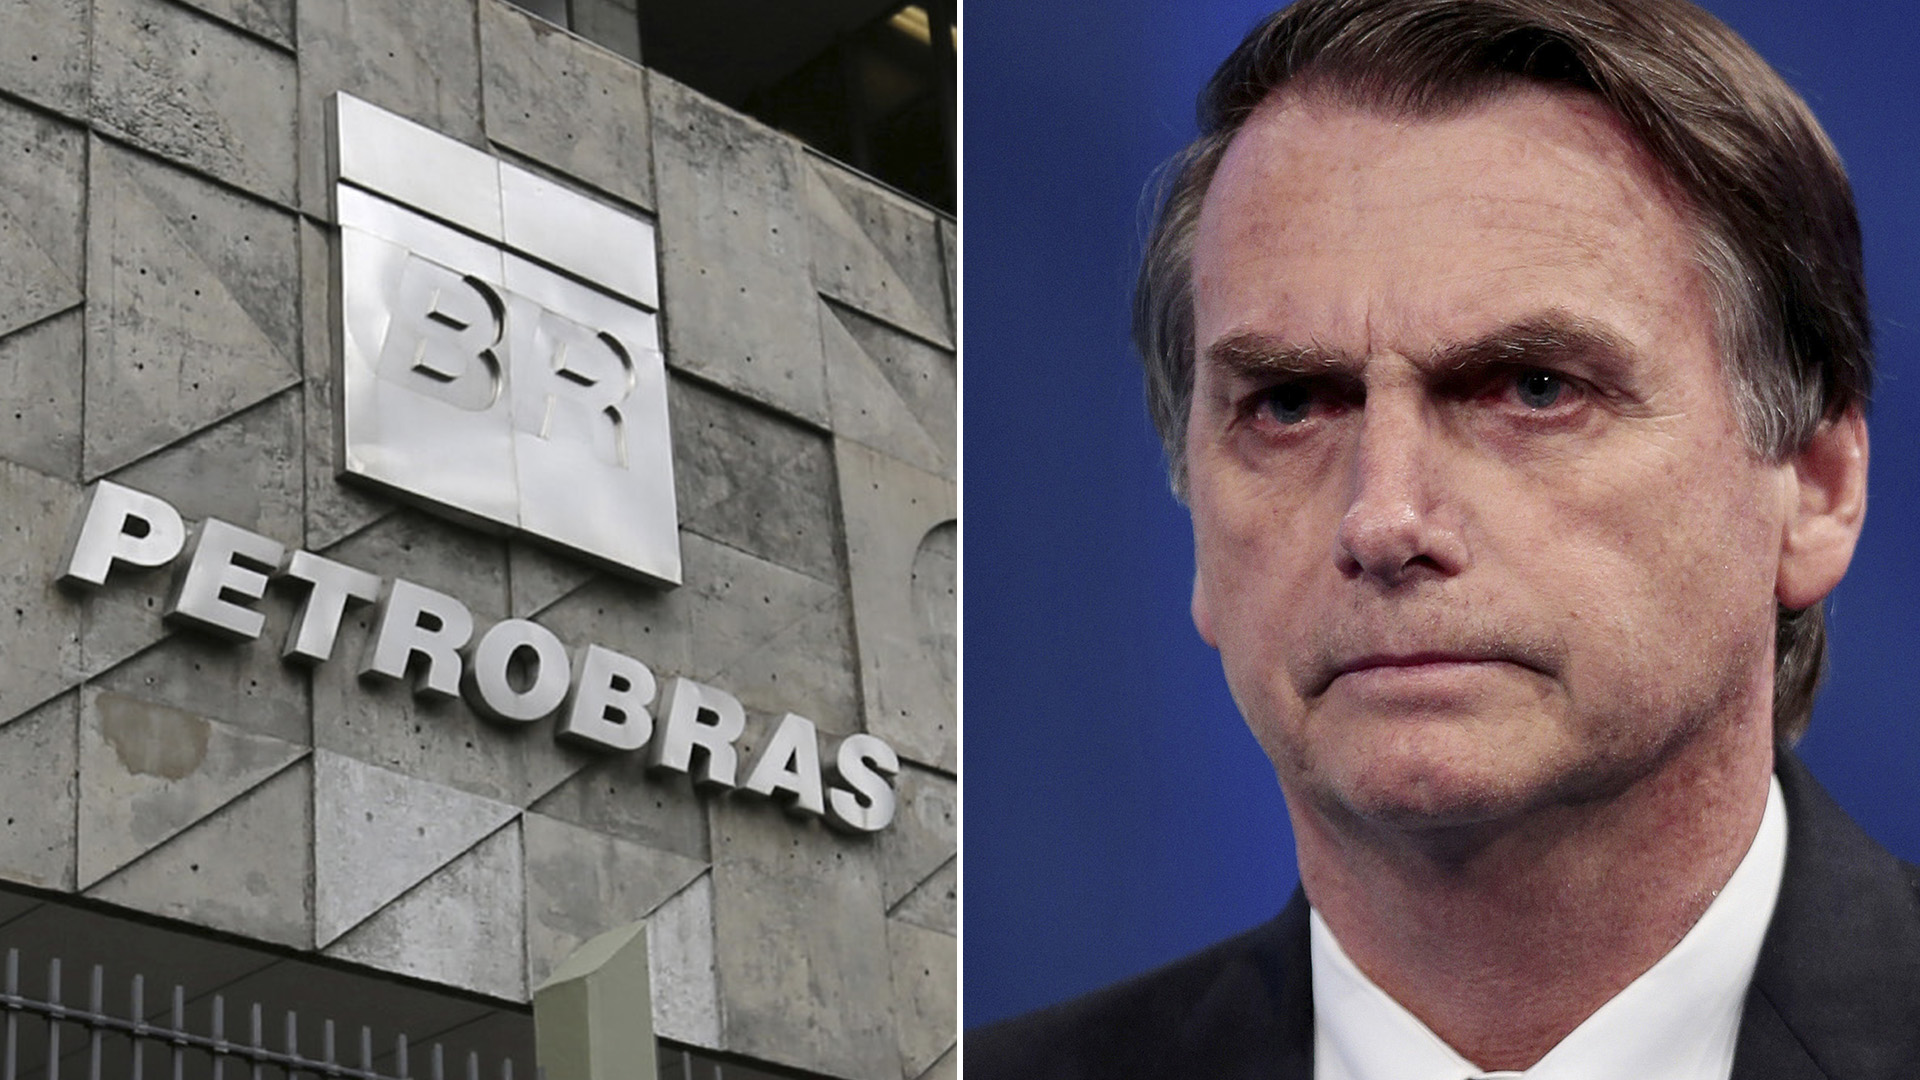 Bolsonaro is keeping the company under pressure, which controls the Brazilian market and implemented constant adjustments following the international price of crude oil, as dictated by its pricing policy.